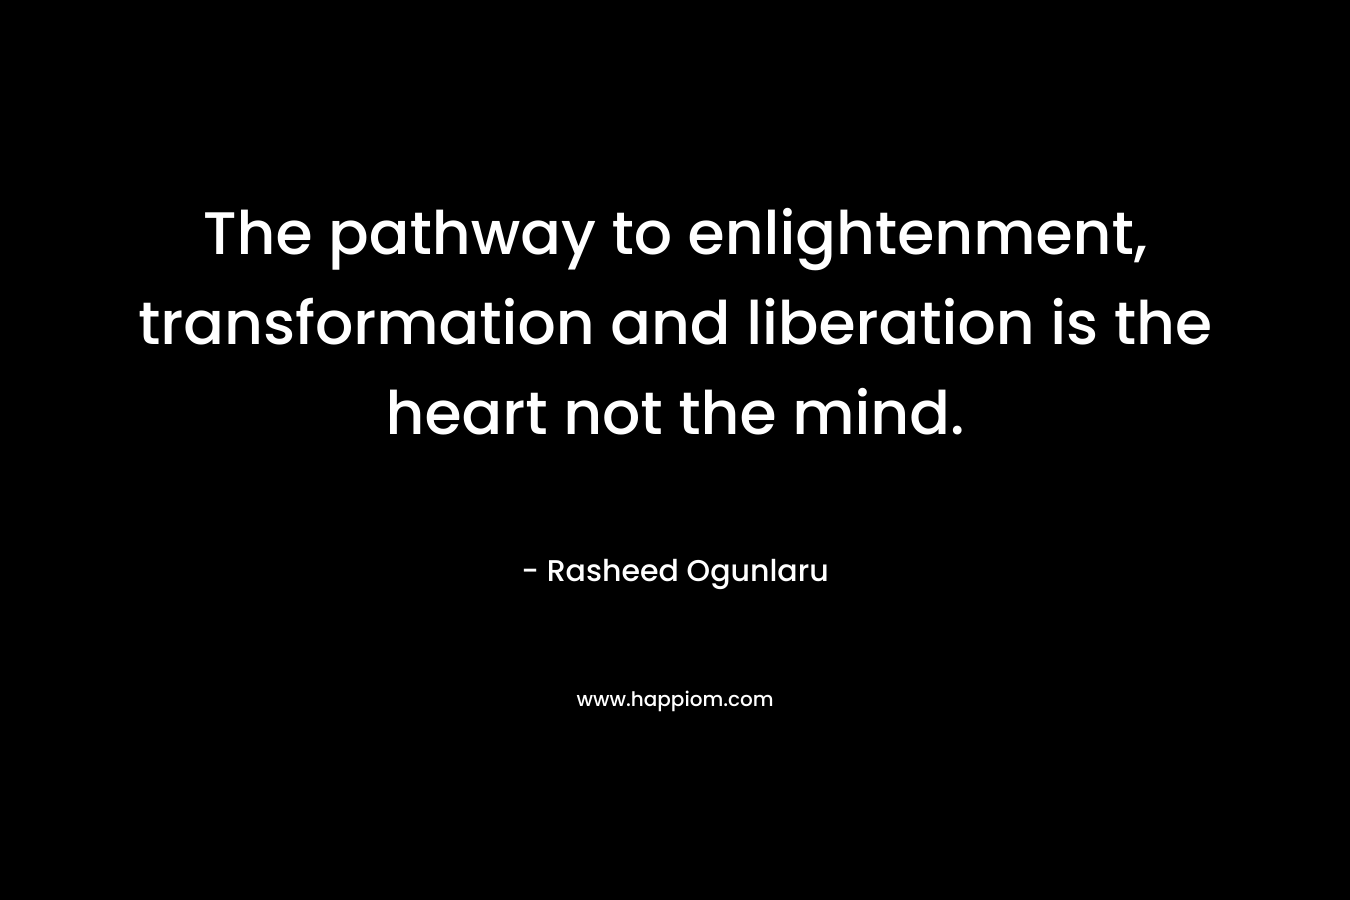 The pathway to enlightenment, transformation and liberation is the heart not the mind. – Rasheed Ogunlaru